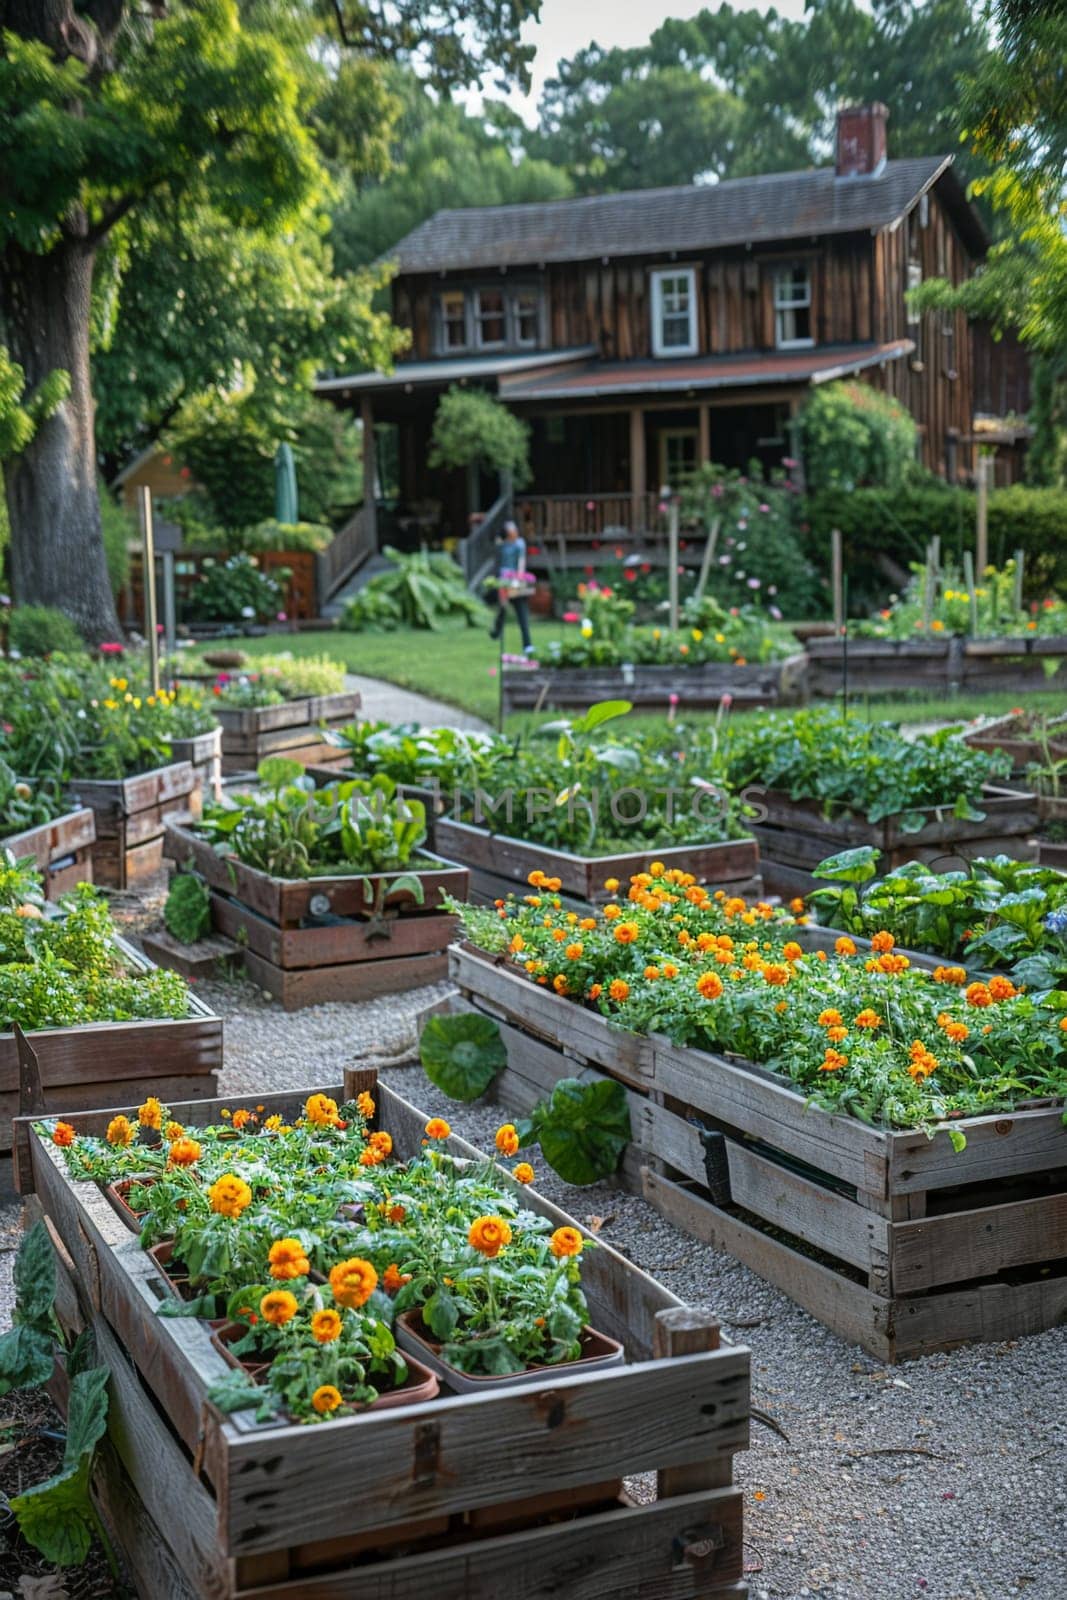 Community Gardens Cultivate Neighborly Bonds in Business of Urban Planting, Gardening tools and communal plots root a story of togetherness and growth in the community garden business.